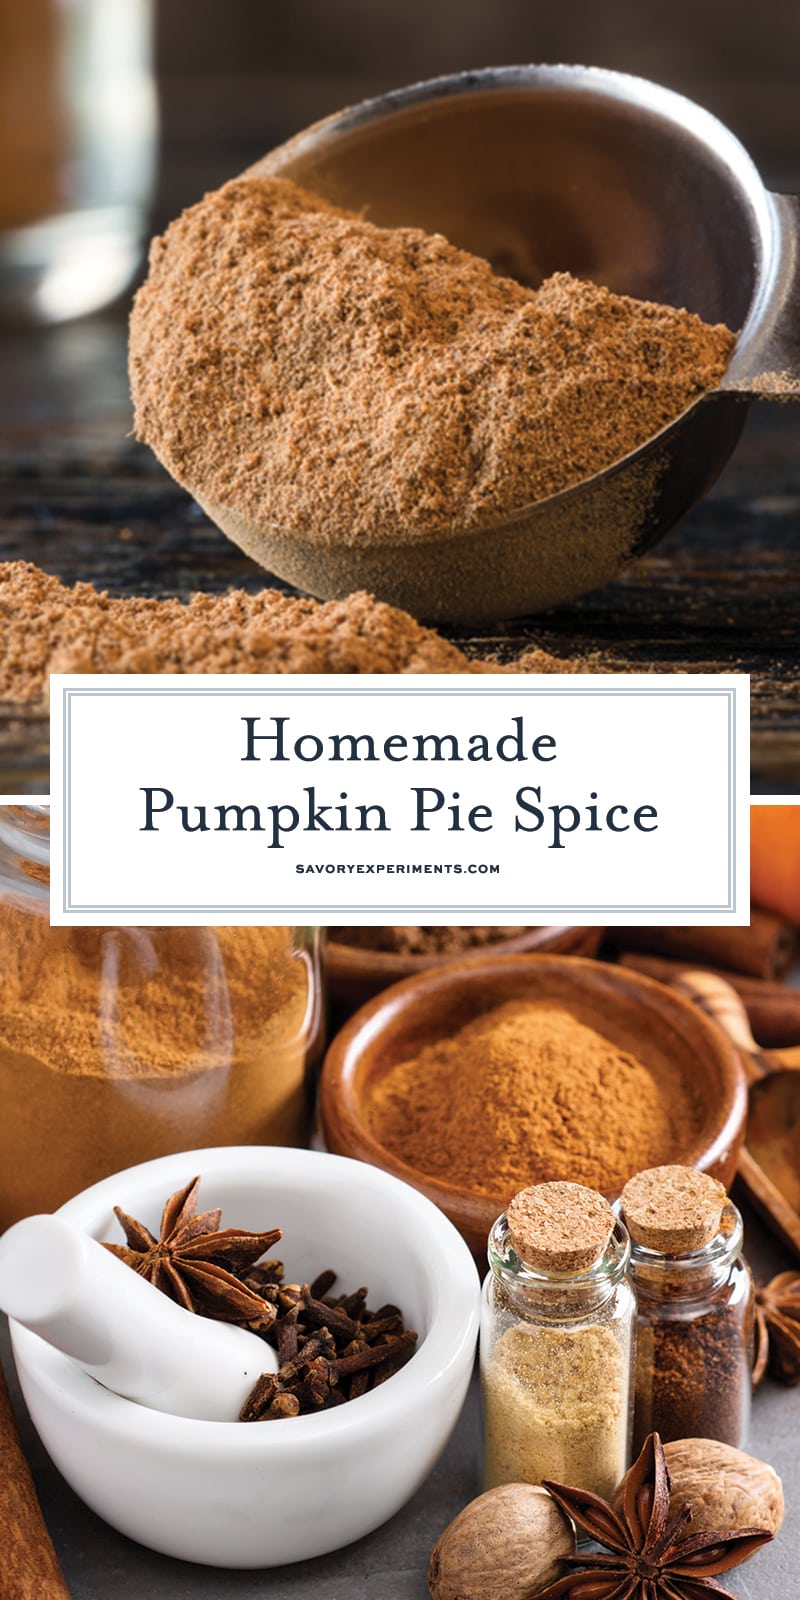 Homemade Pumpkin Pie Spice Recipe (Only 5 Pantry Ingredients!)